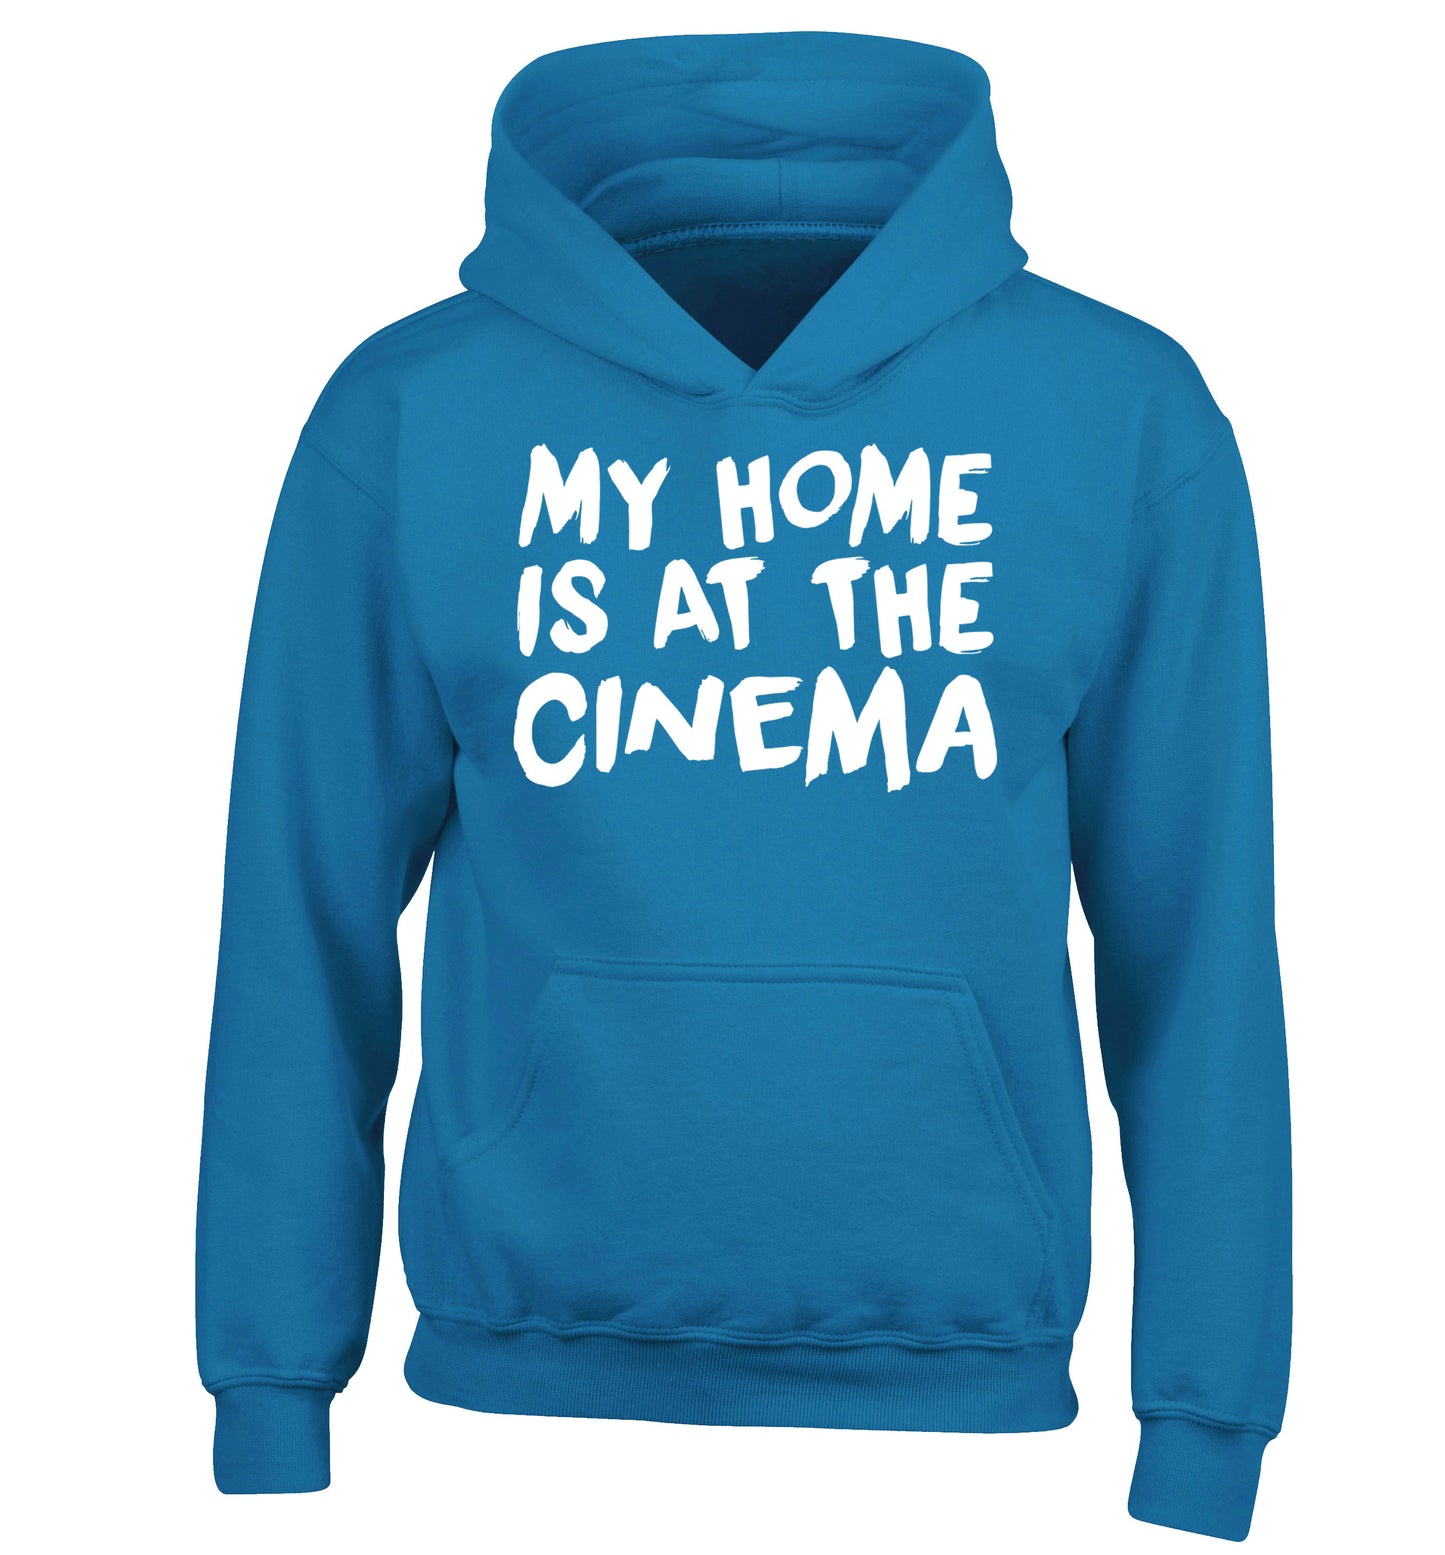 My home is at the cinema children's blue hoodie 12-14 Years